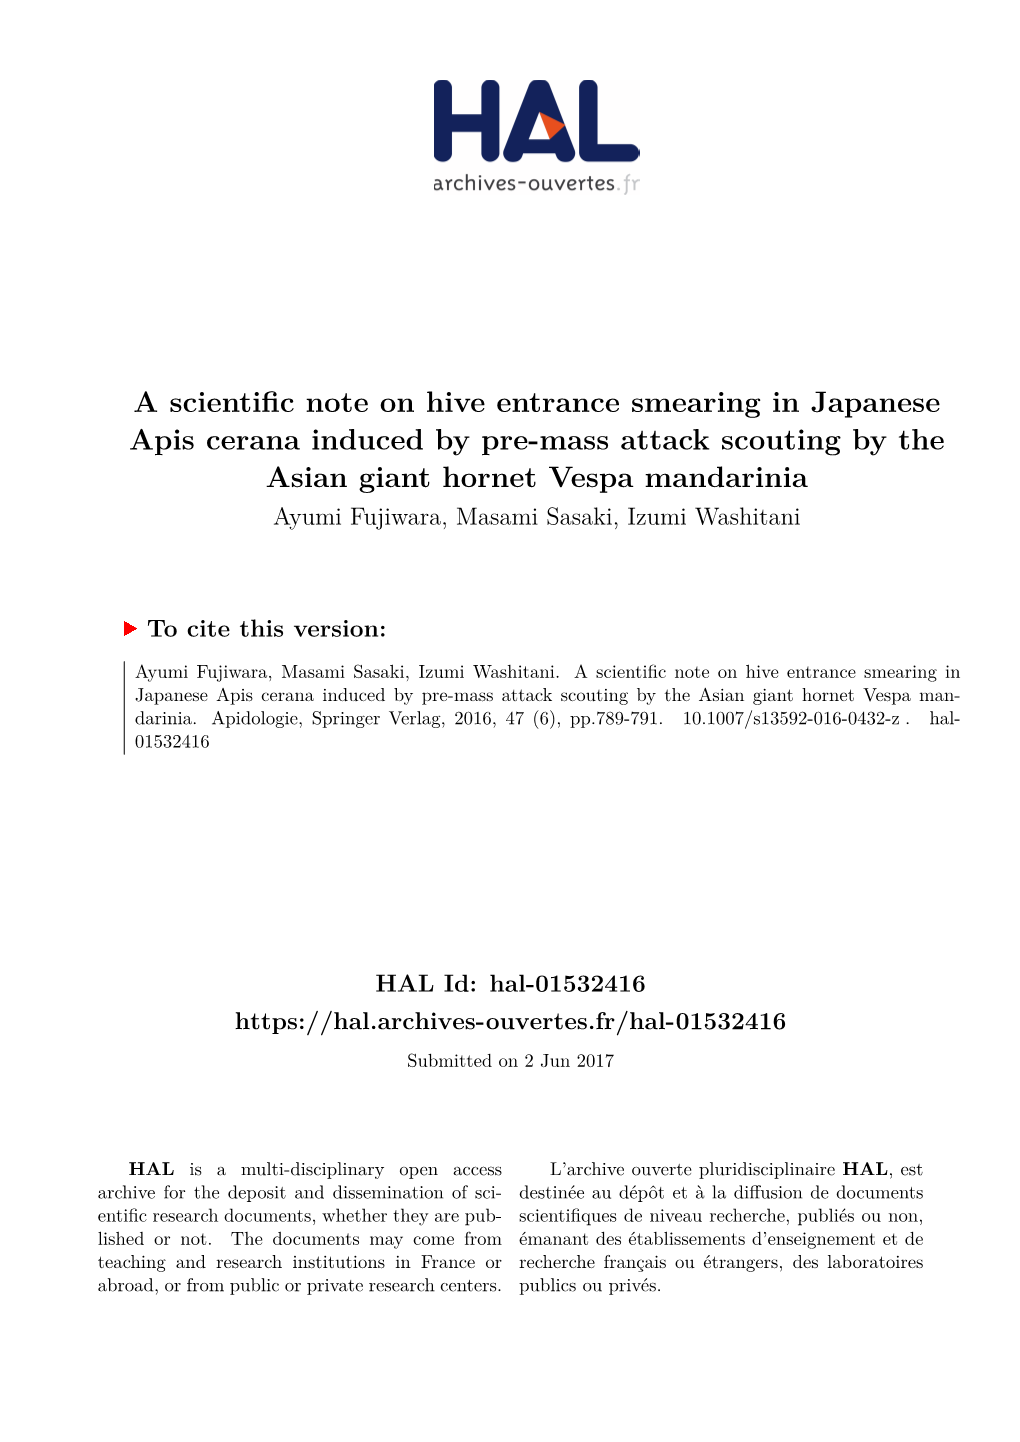 A Scientific Note on Hive Entrance Smearing in Japanese Apis Cerana